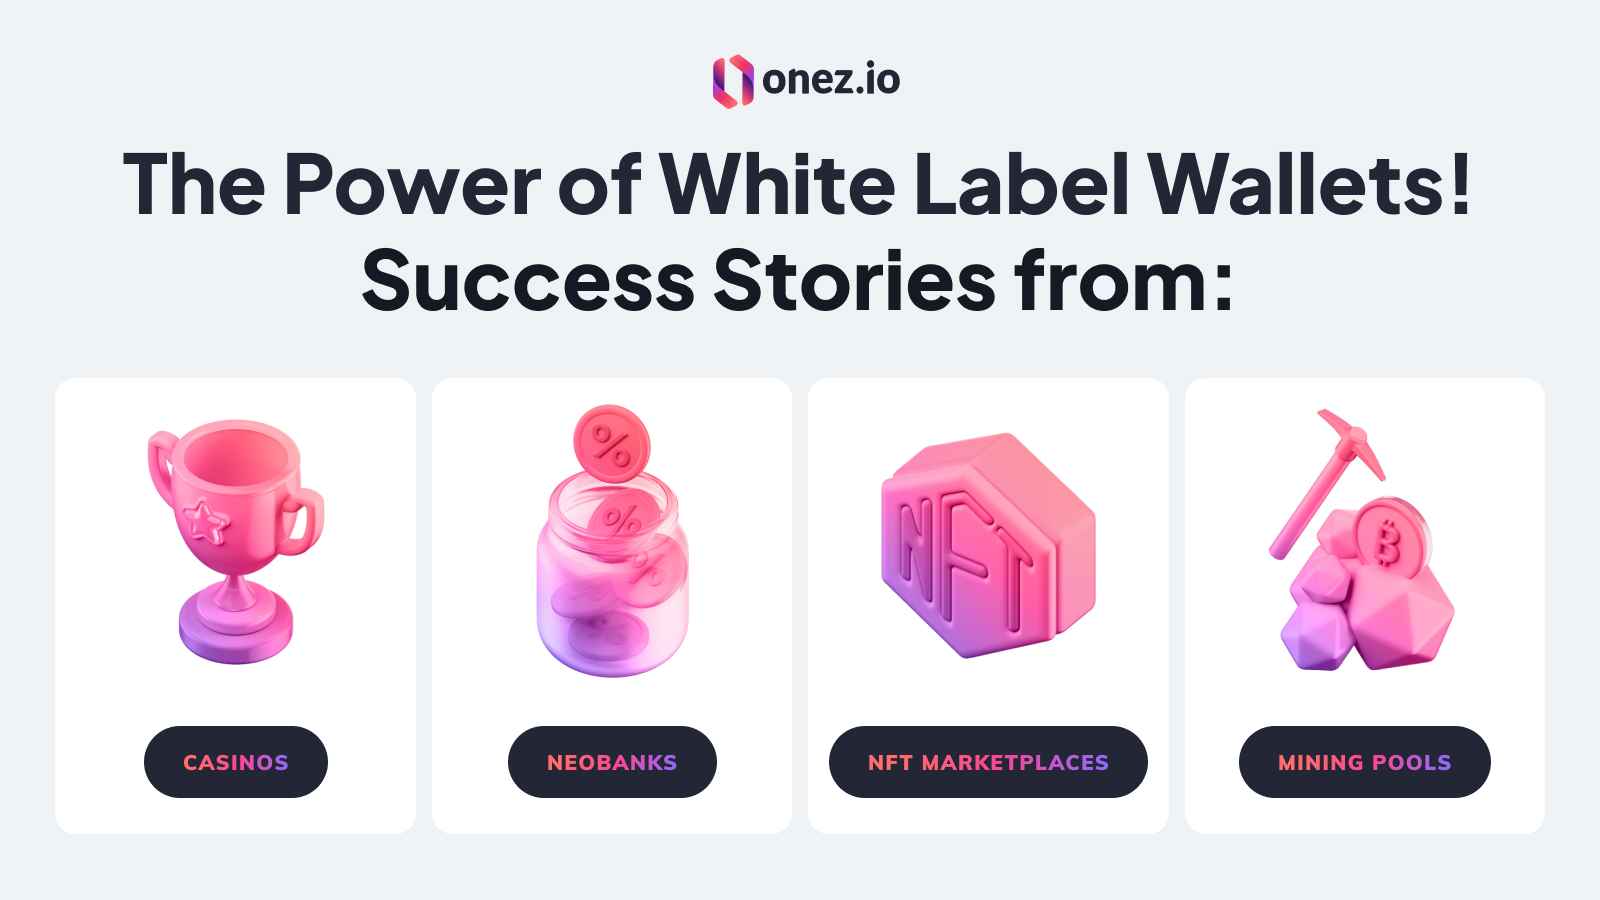 The Power of White Label Crypto Wallets: Success Stories from Bloggers, NeoBanks, NFT Marketplaces, and Mining Pools